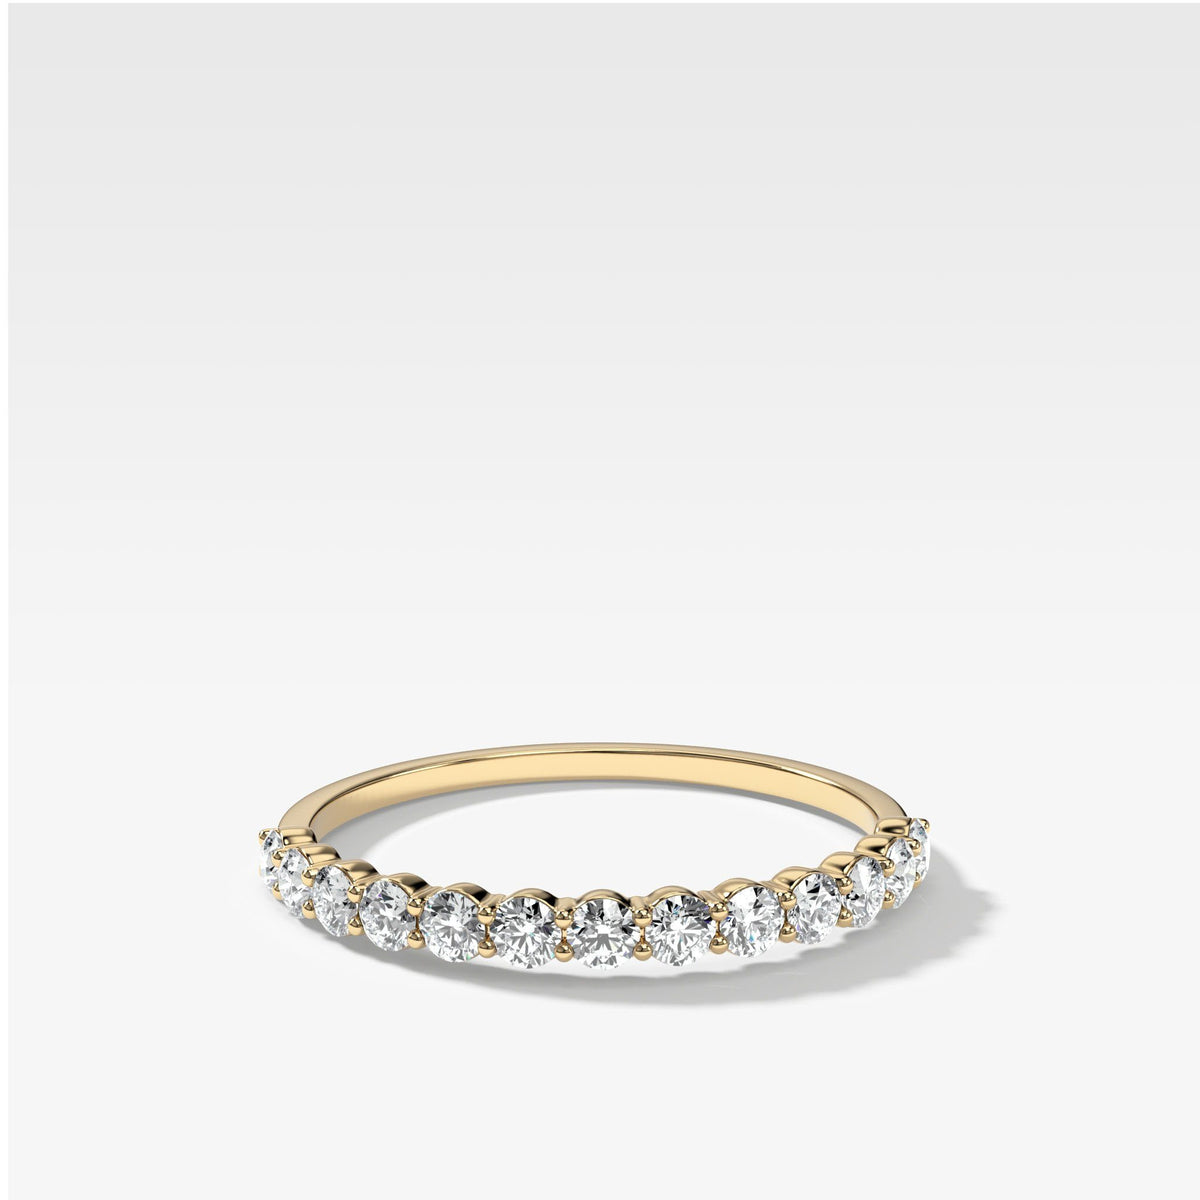 Petite Shared Prong Wedding Band by Good Stone in Yellow Gold